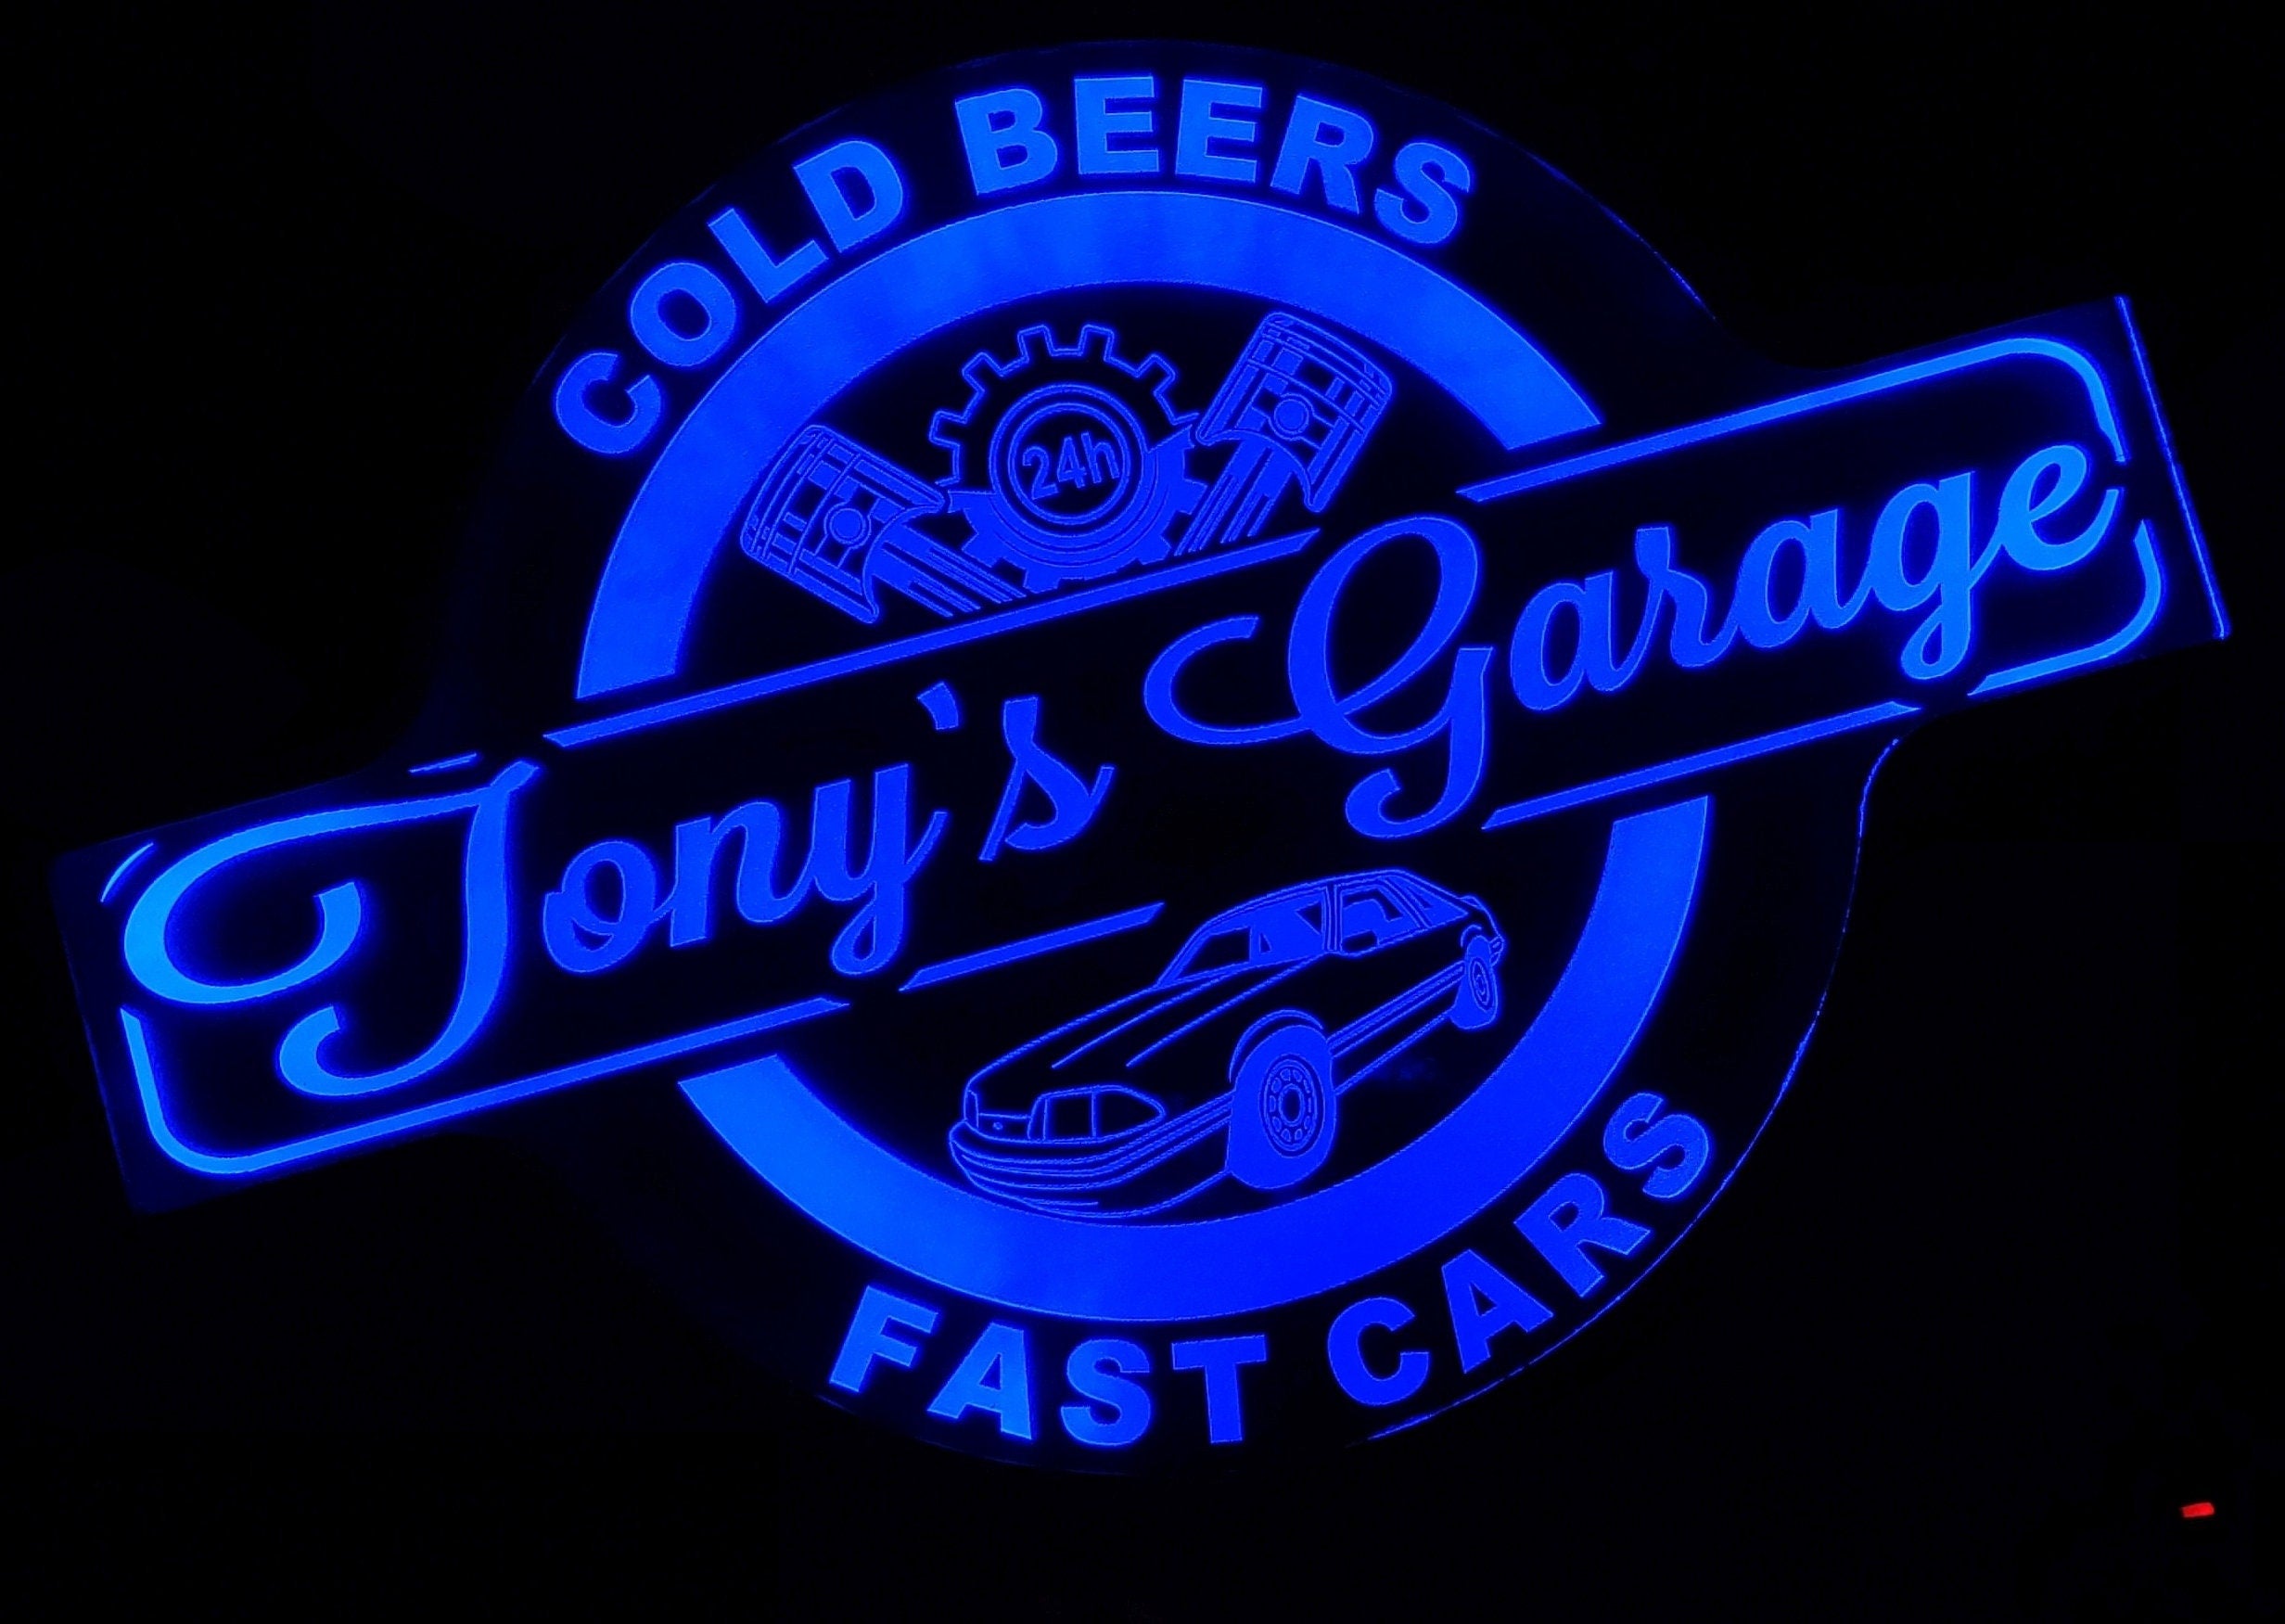 Custom Garage Sign with Cars - Trucks - Tractors - Color Changing Acrylic Wall Led Night Light Neon Like 4 Sizes Free Shipping